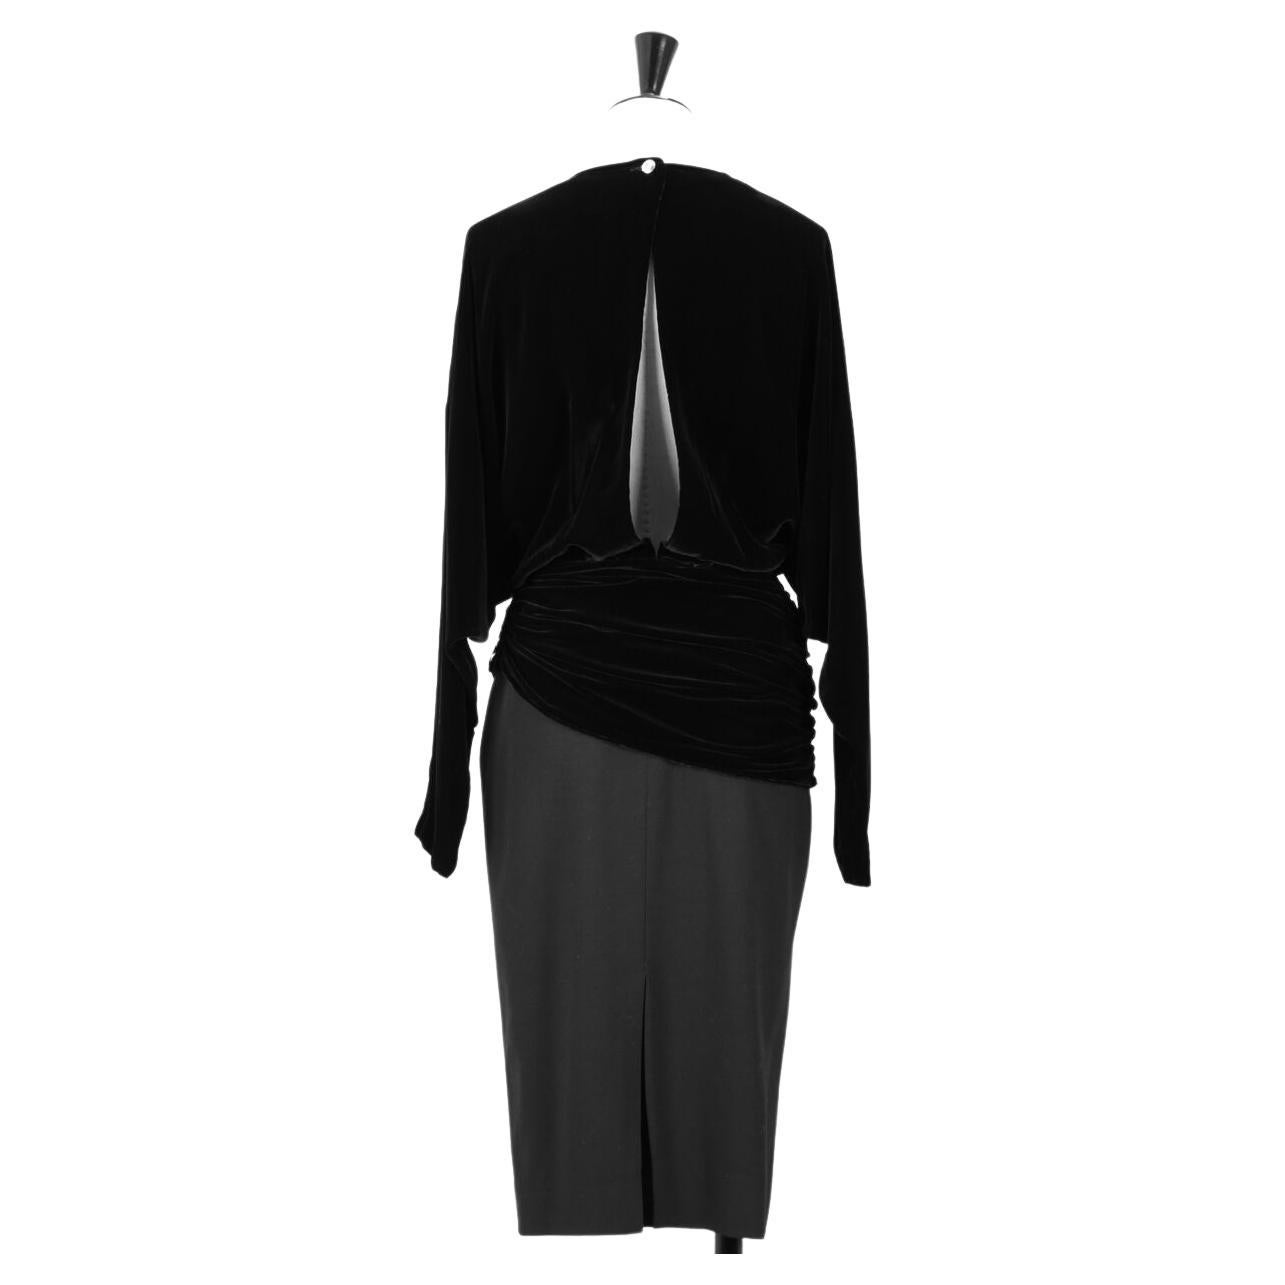 Louis Féraud 1980s Black Velvet And Wool Cocktail Dress With Rhinestone Buttons For Sale